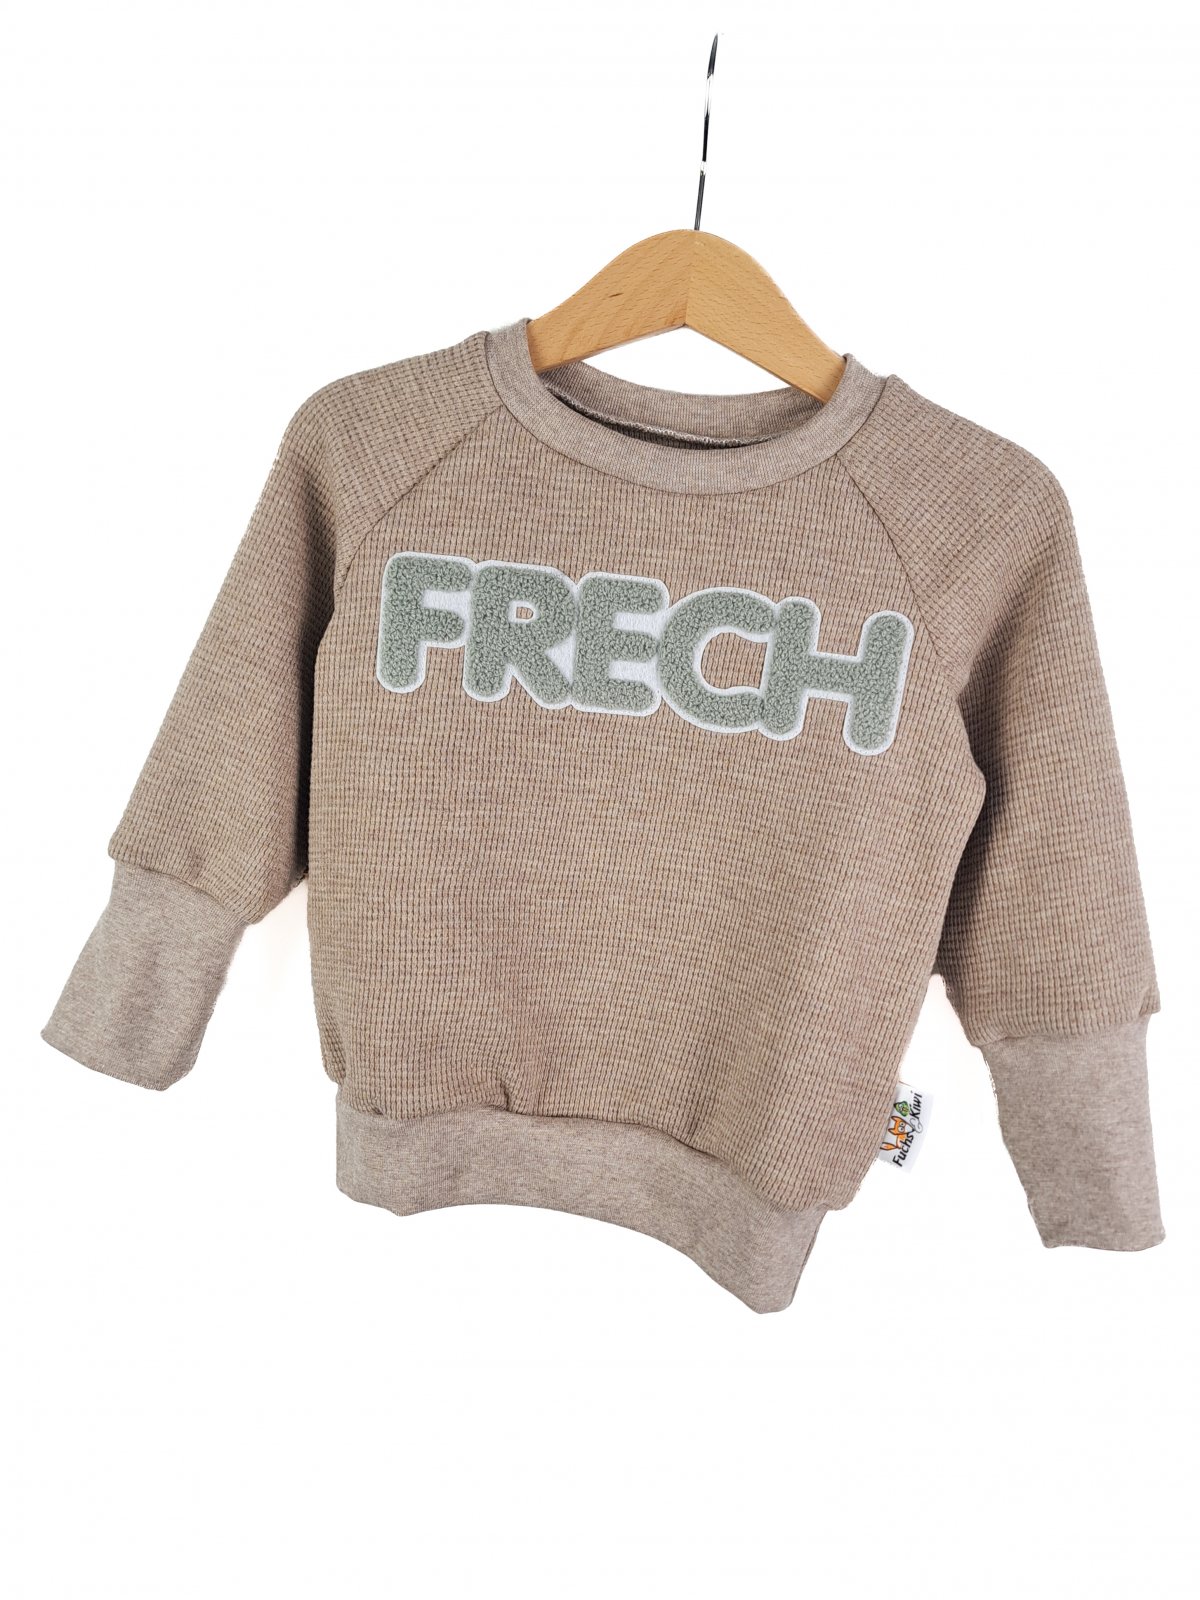 Pullover Frech-Patch